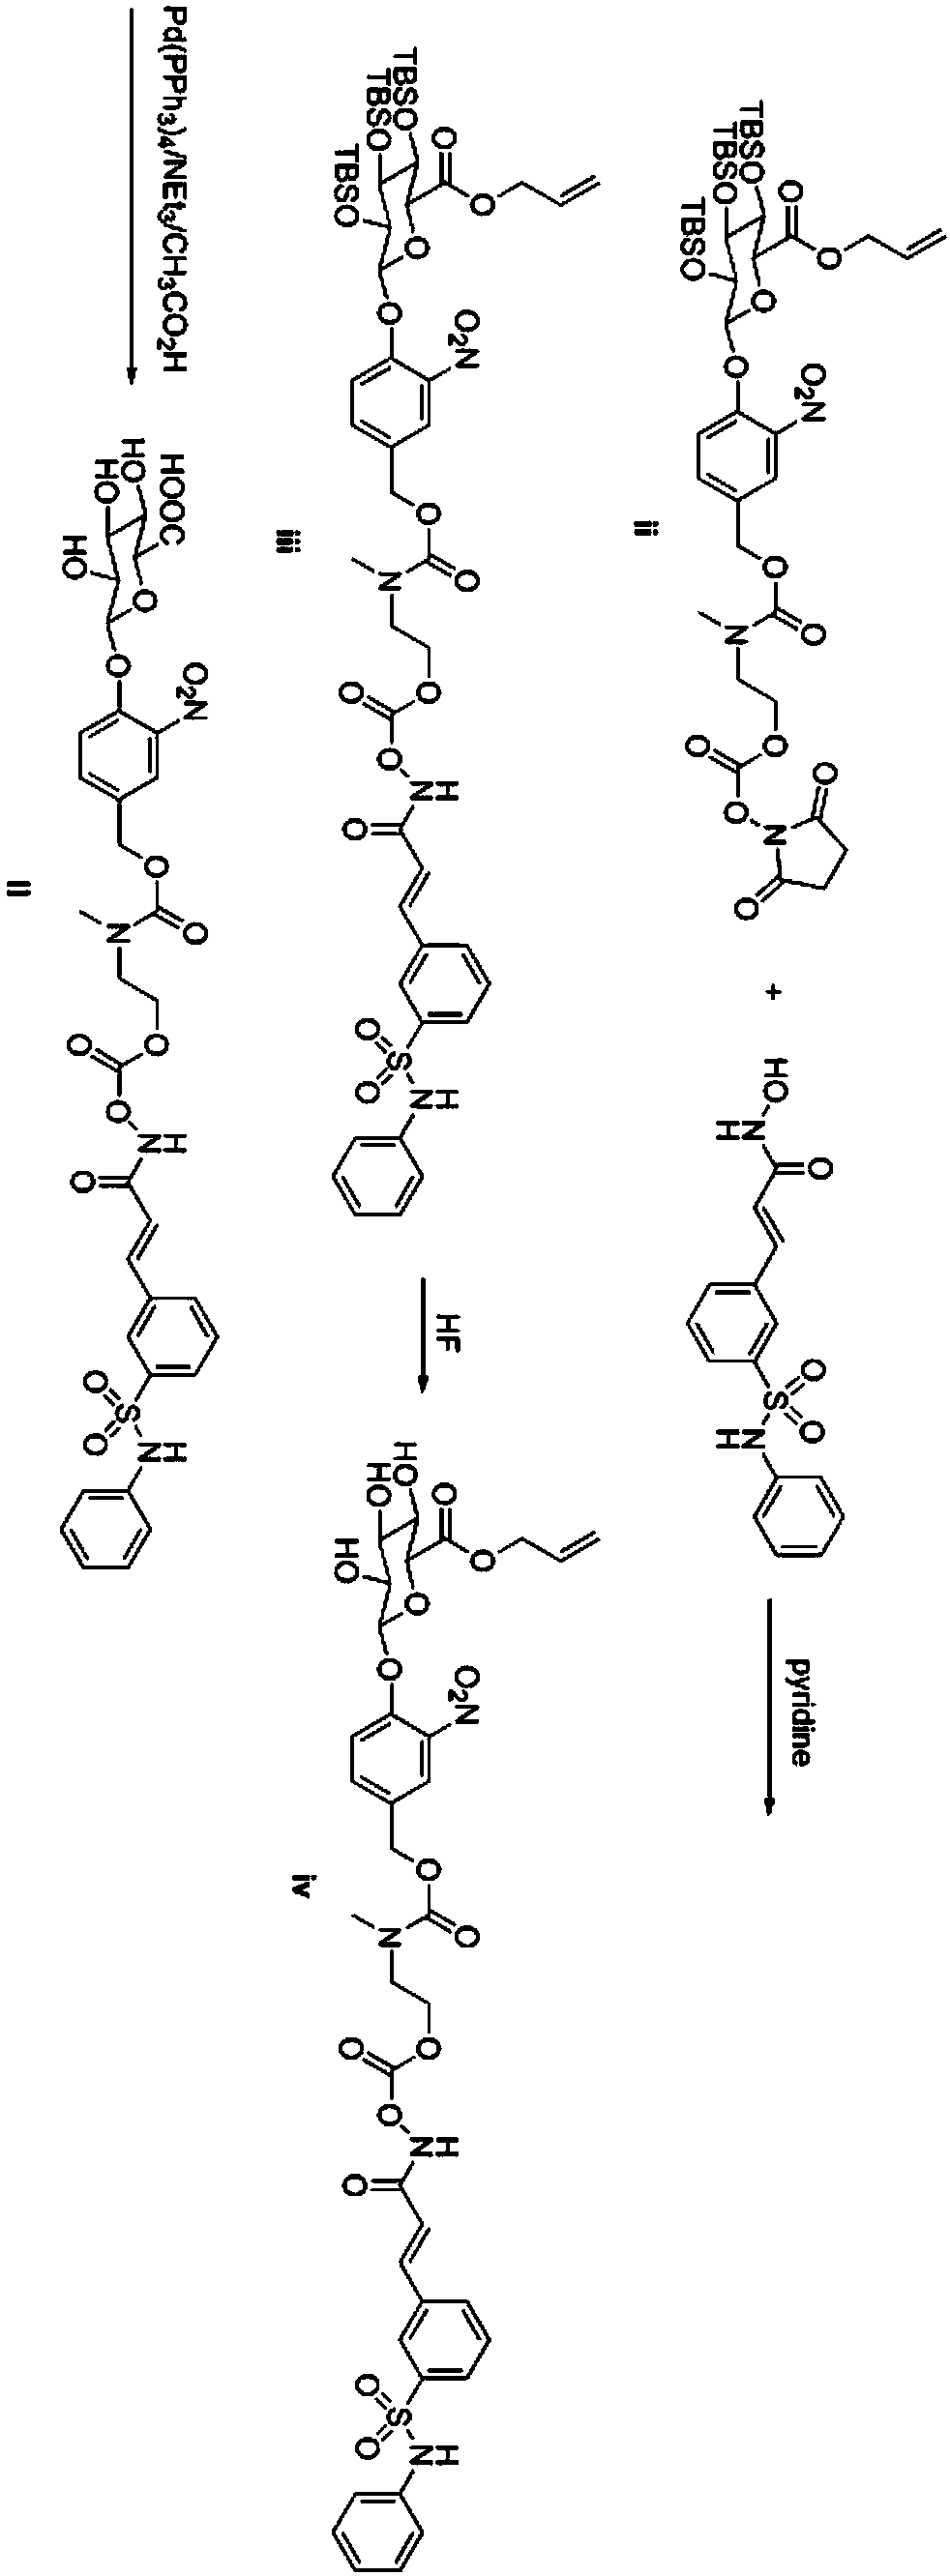 Belinostat derivative based on acetic acid, and preparation method and application thereof